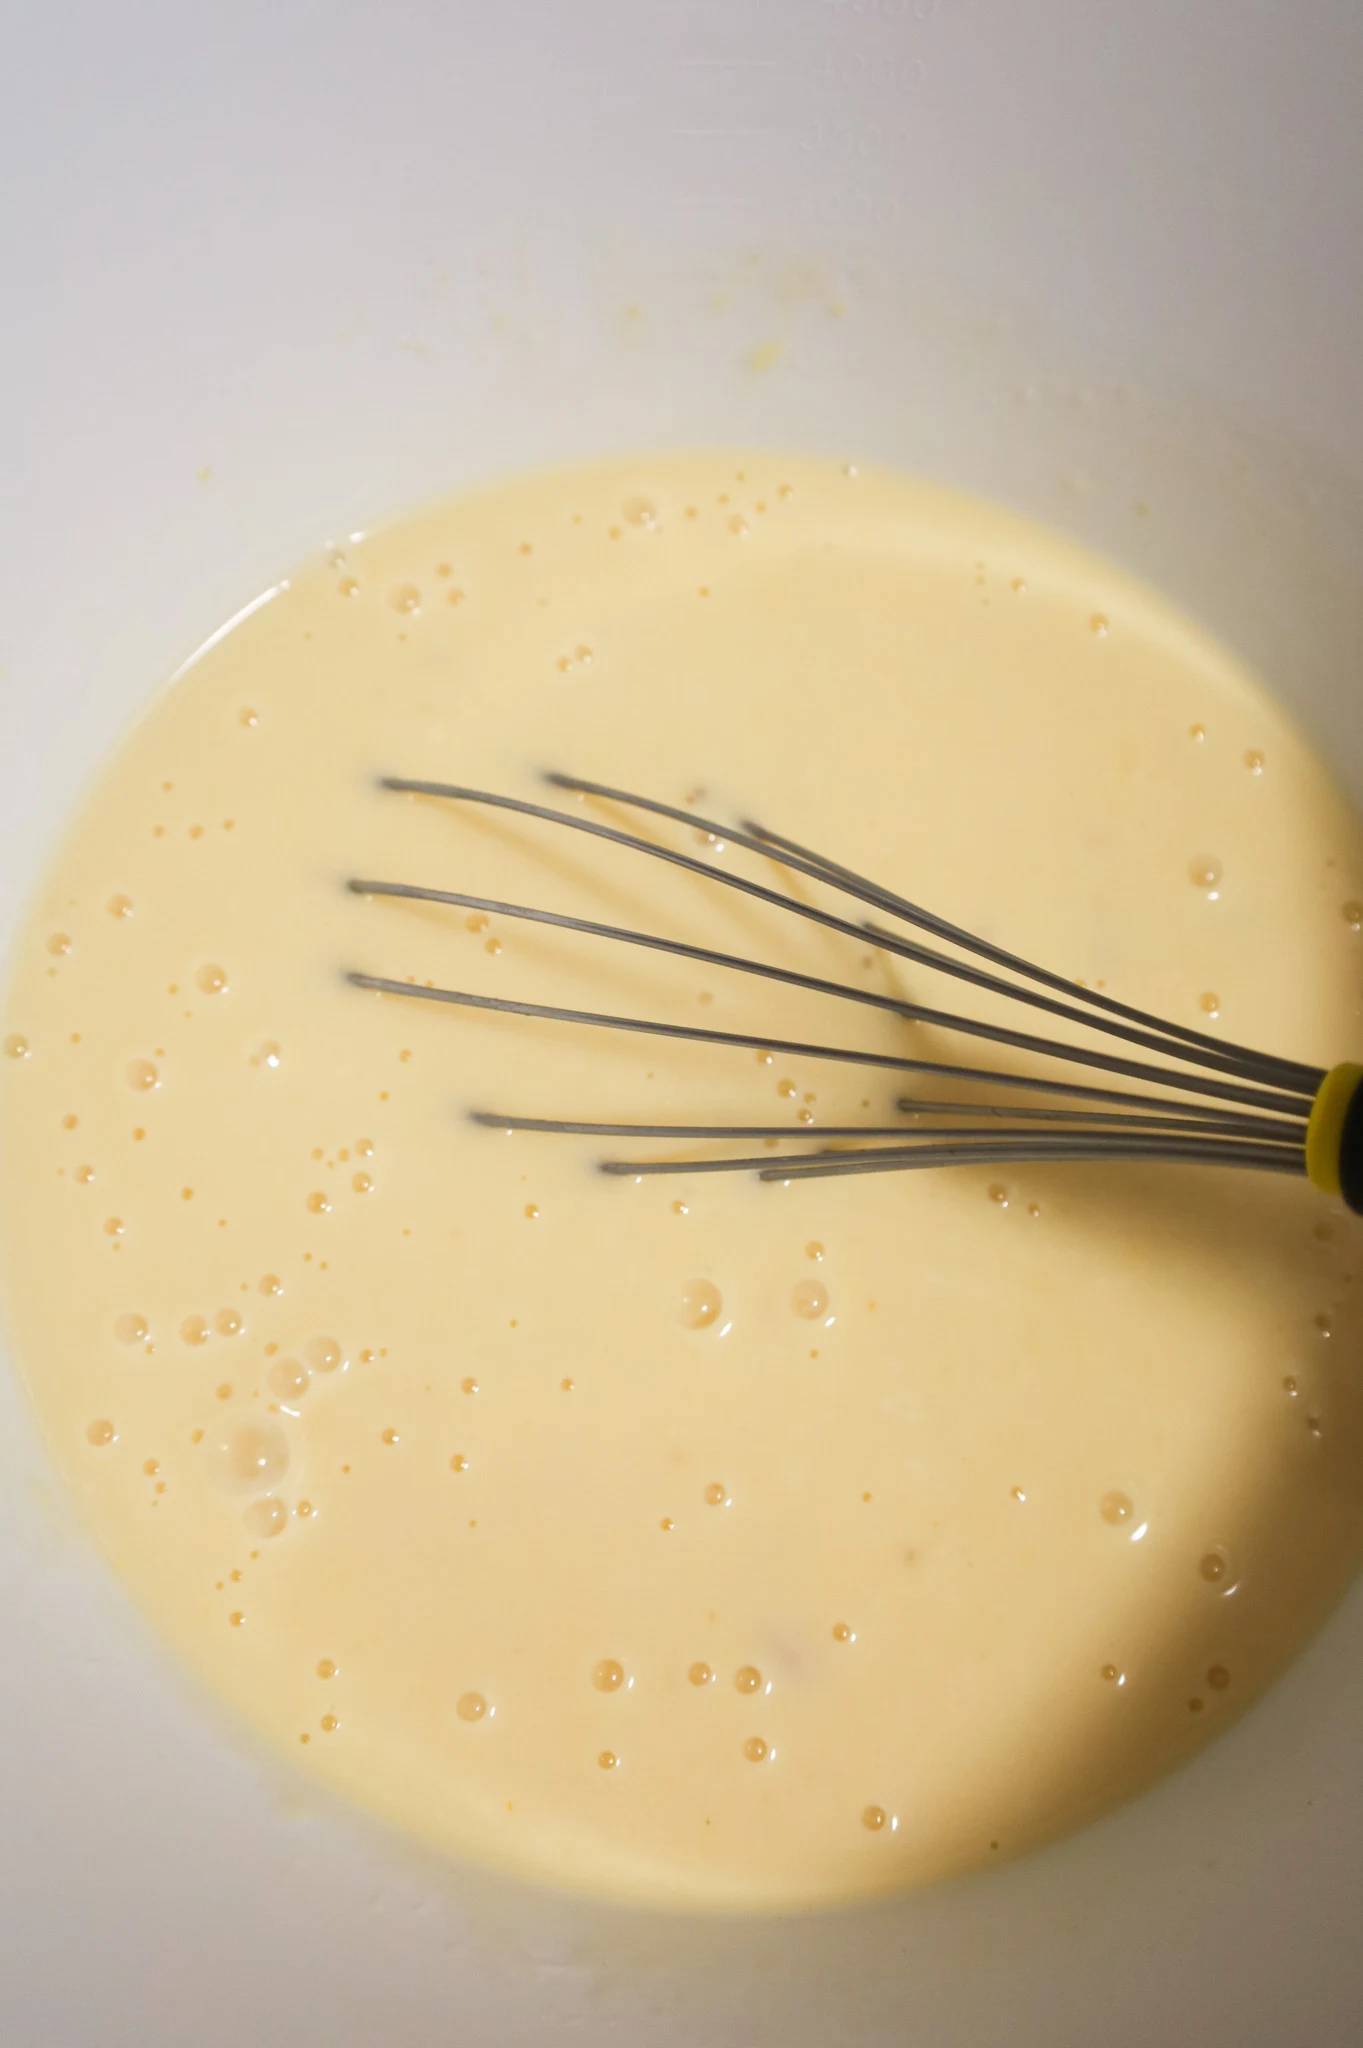 cream soup and milk mixture in a mixing bowl